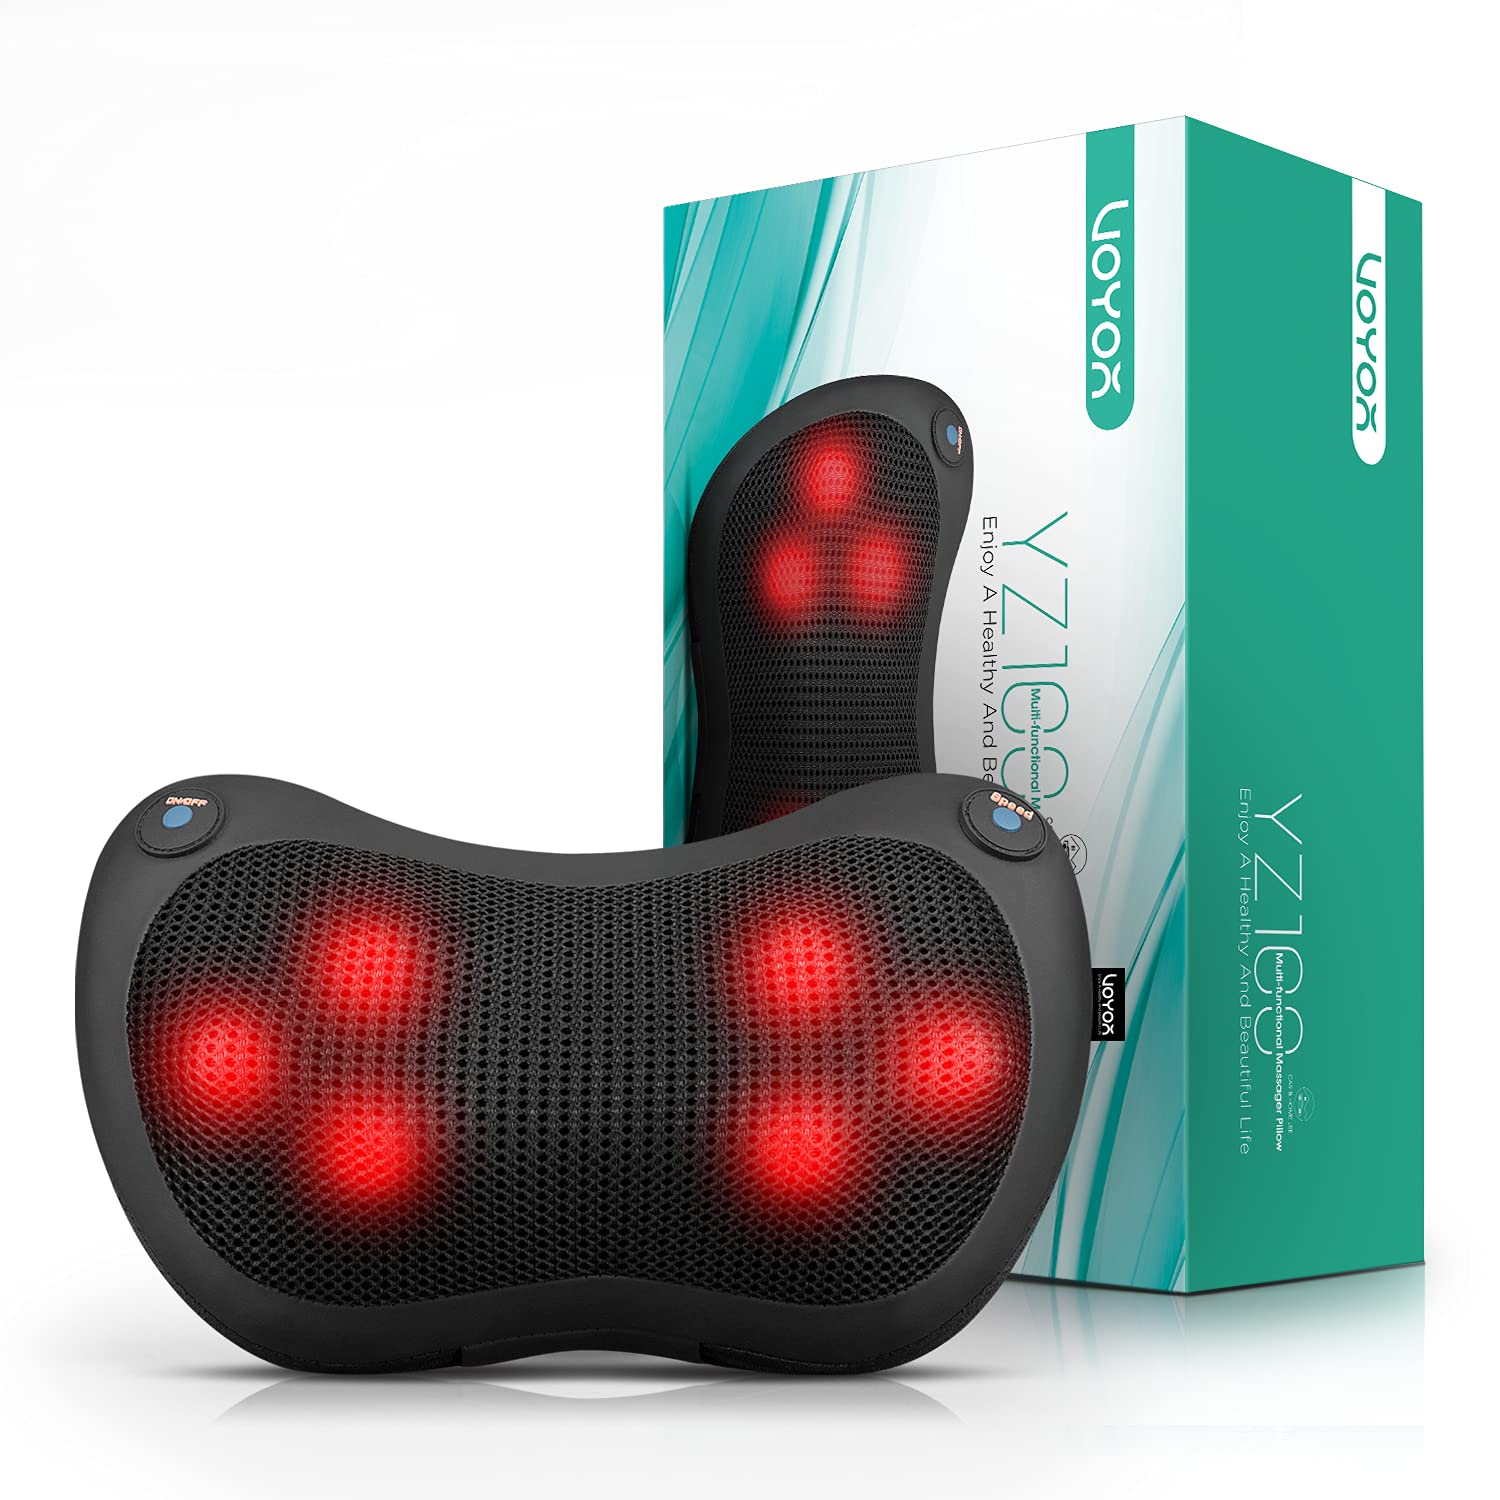 VOYOR-HEALTH VOYOR Shiatsu Neck and Back Massager with Heat - 3D Kneading Deep Tissue Massage Pillow for Lower Back, Shoulder, calf, Foot, Us